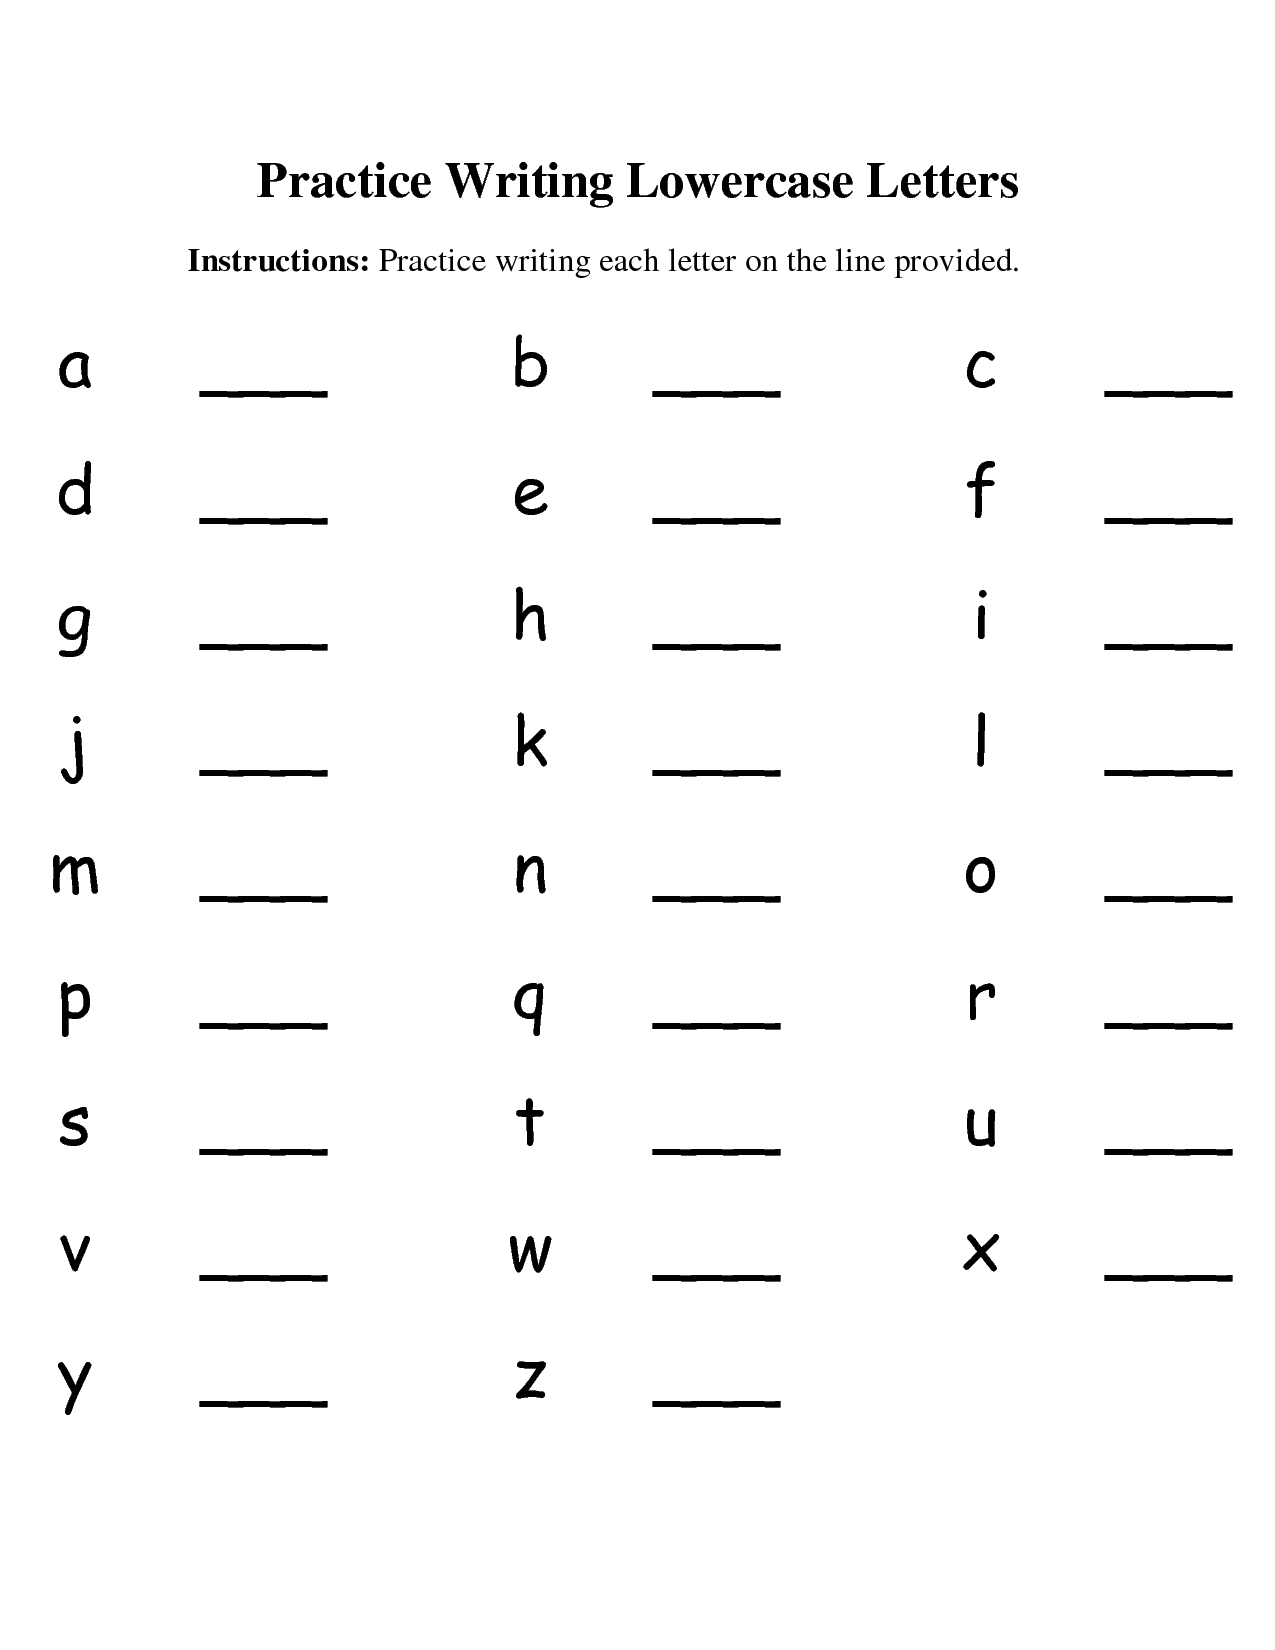 Practice Writing Lowercase Letters Image